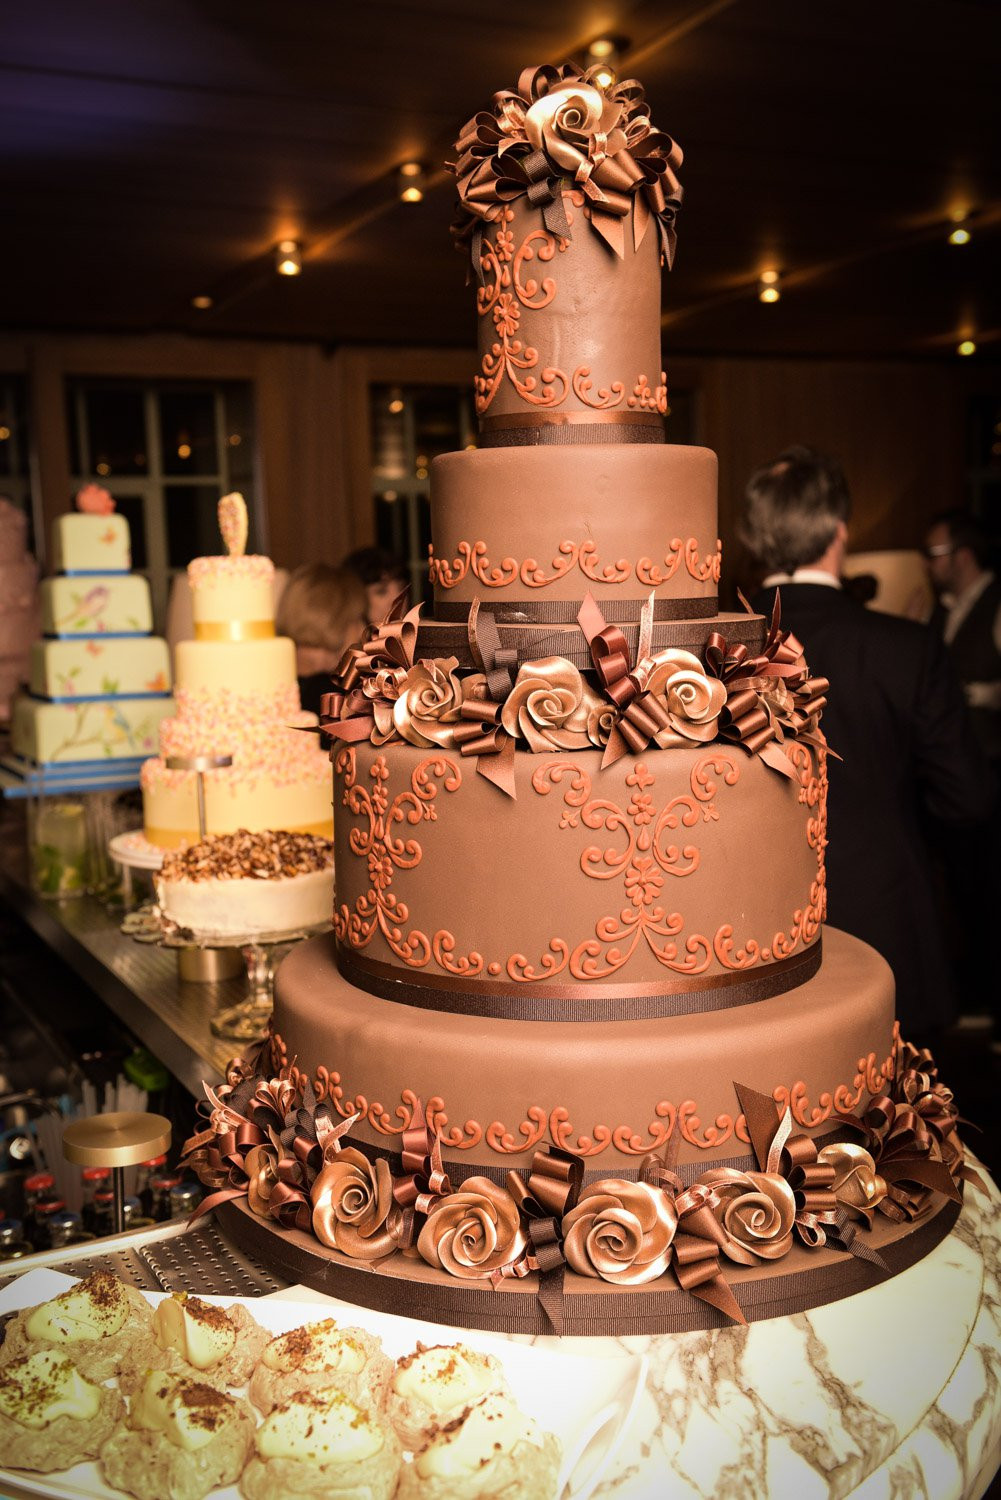 Famous Wedding Cakes
 9 Most Extravagant And Expensive Celebrity Wedding Cakes